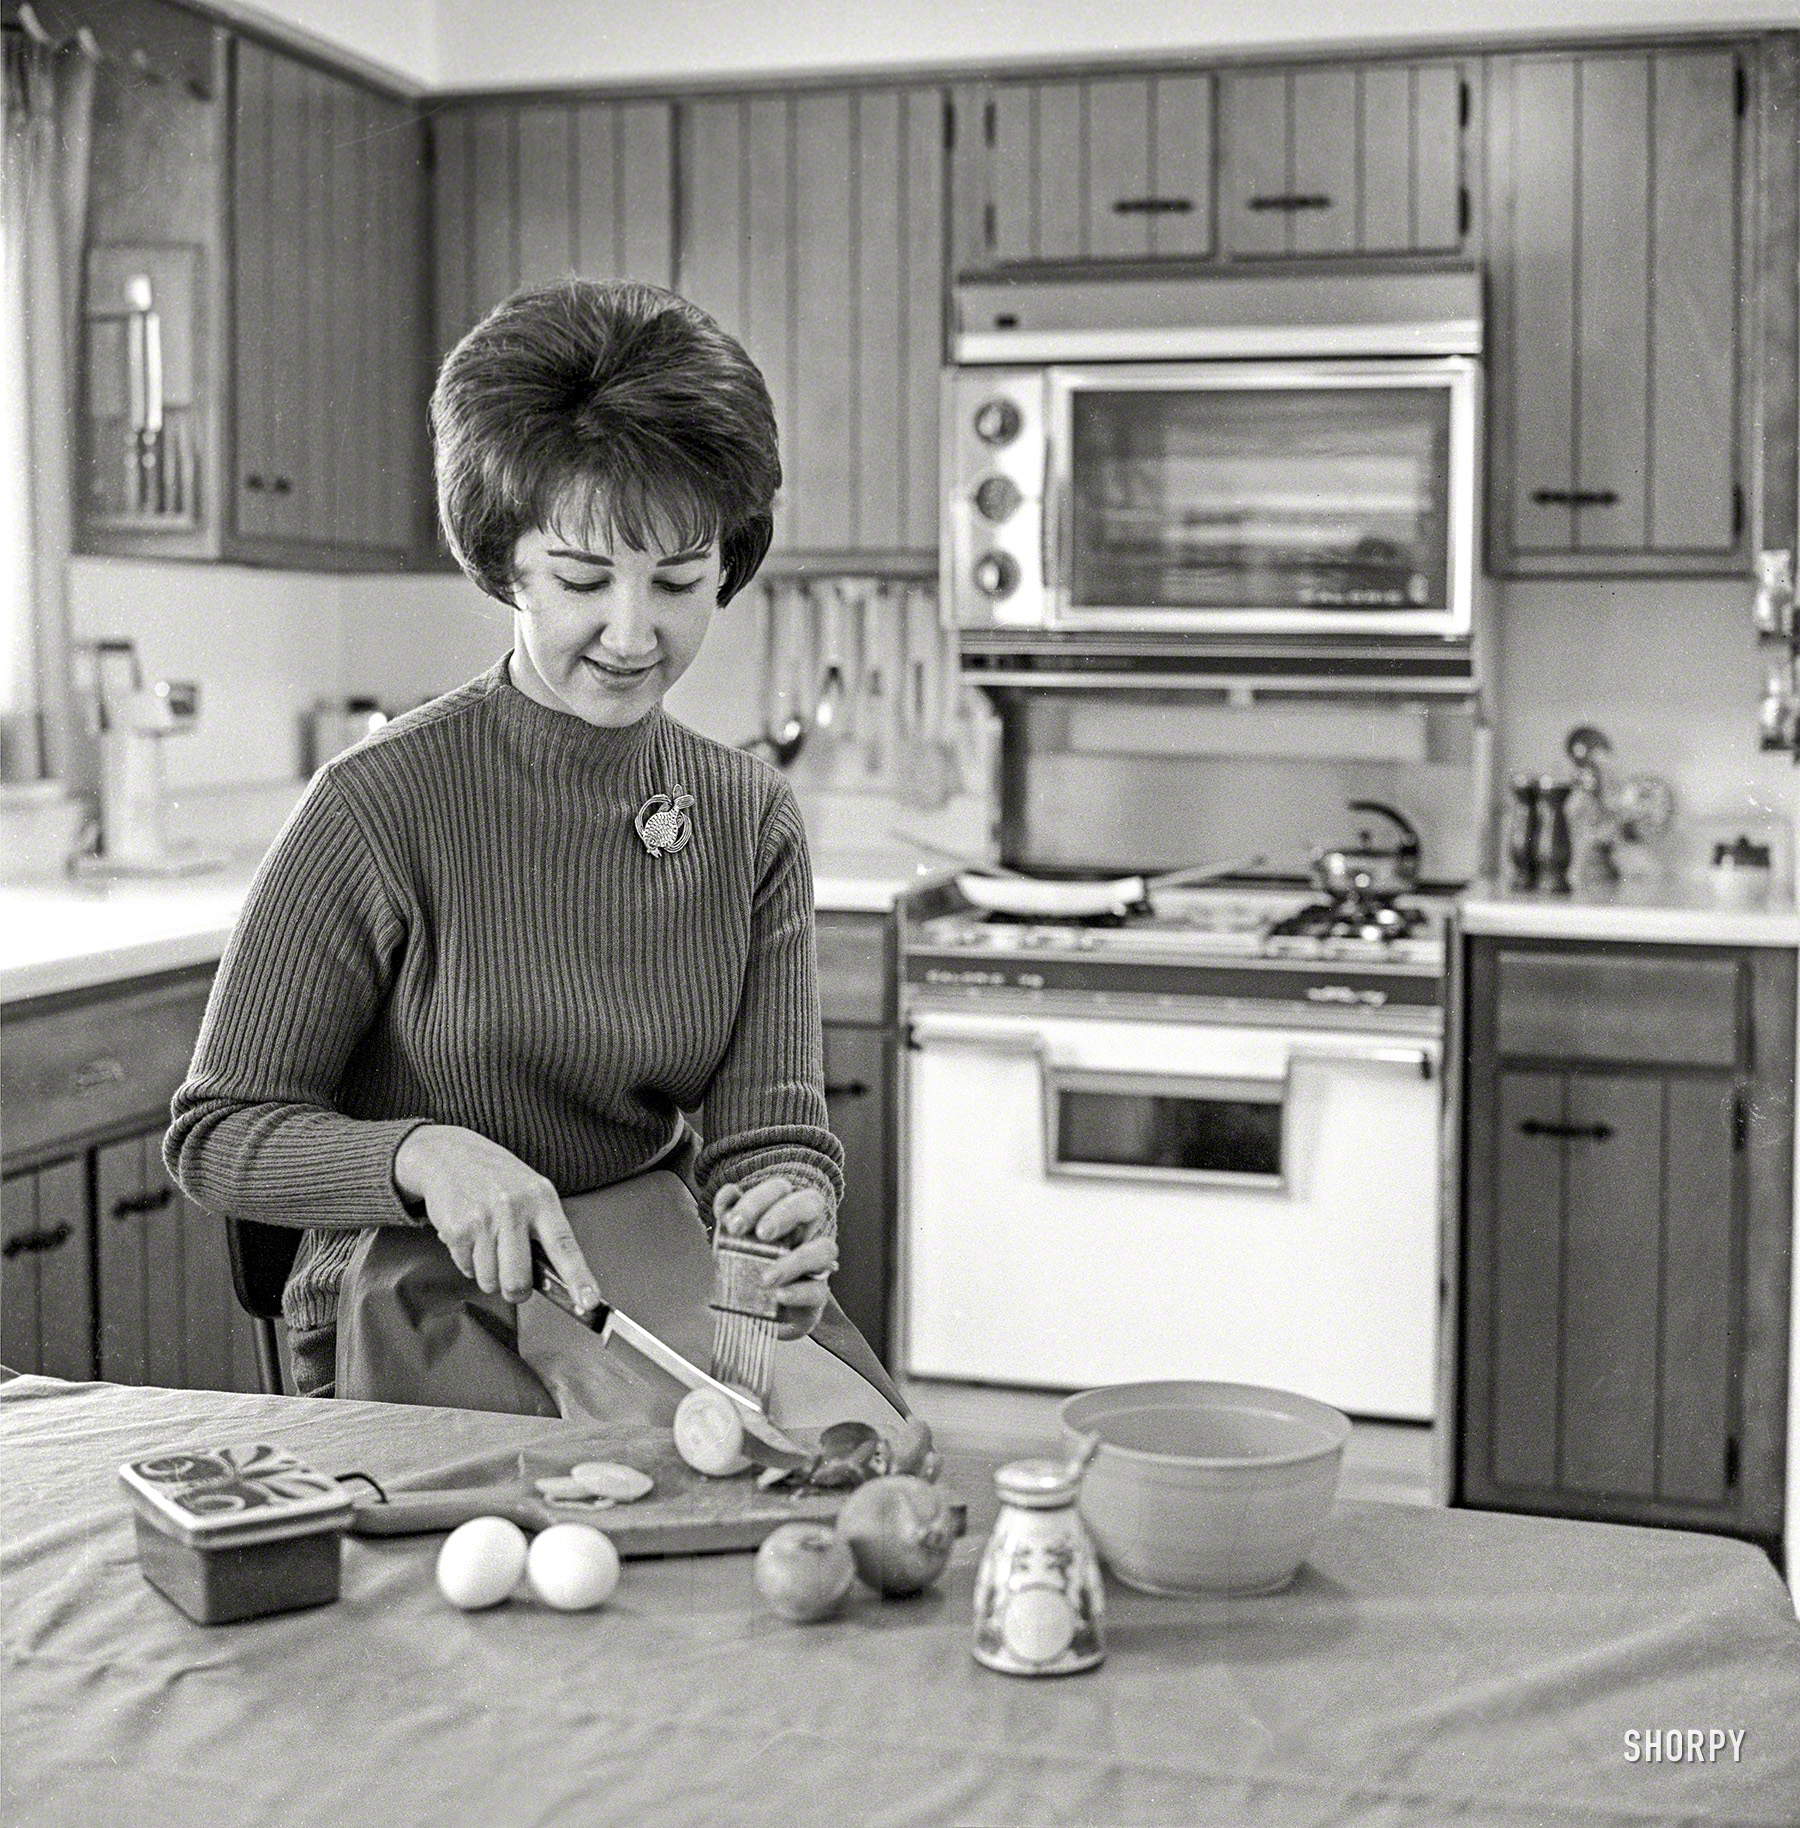 From Chicago circa 1965 comes this uncaptioned snap of a lady in a kitchen showing an onion who's boss. Other ingredients include two eggs and a fish. Medium format negative from the News Photo Archive. View full size.